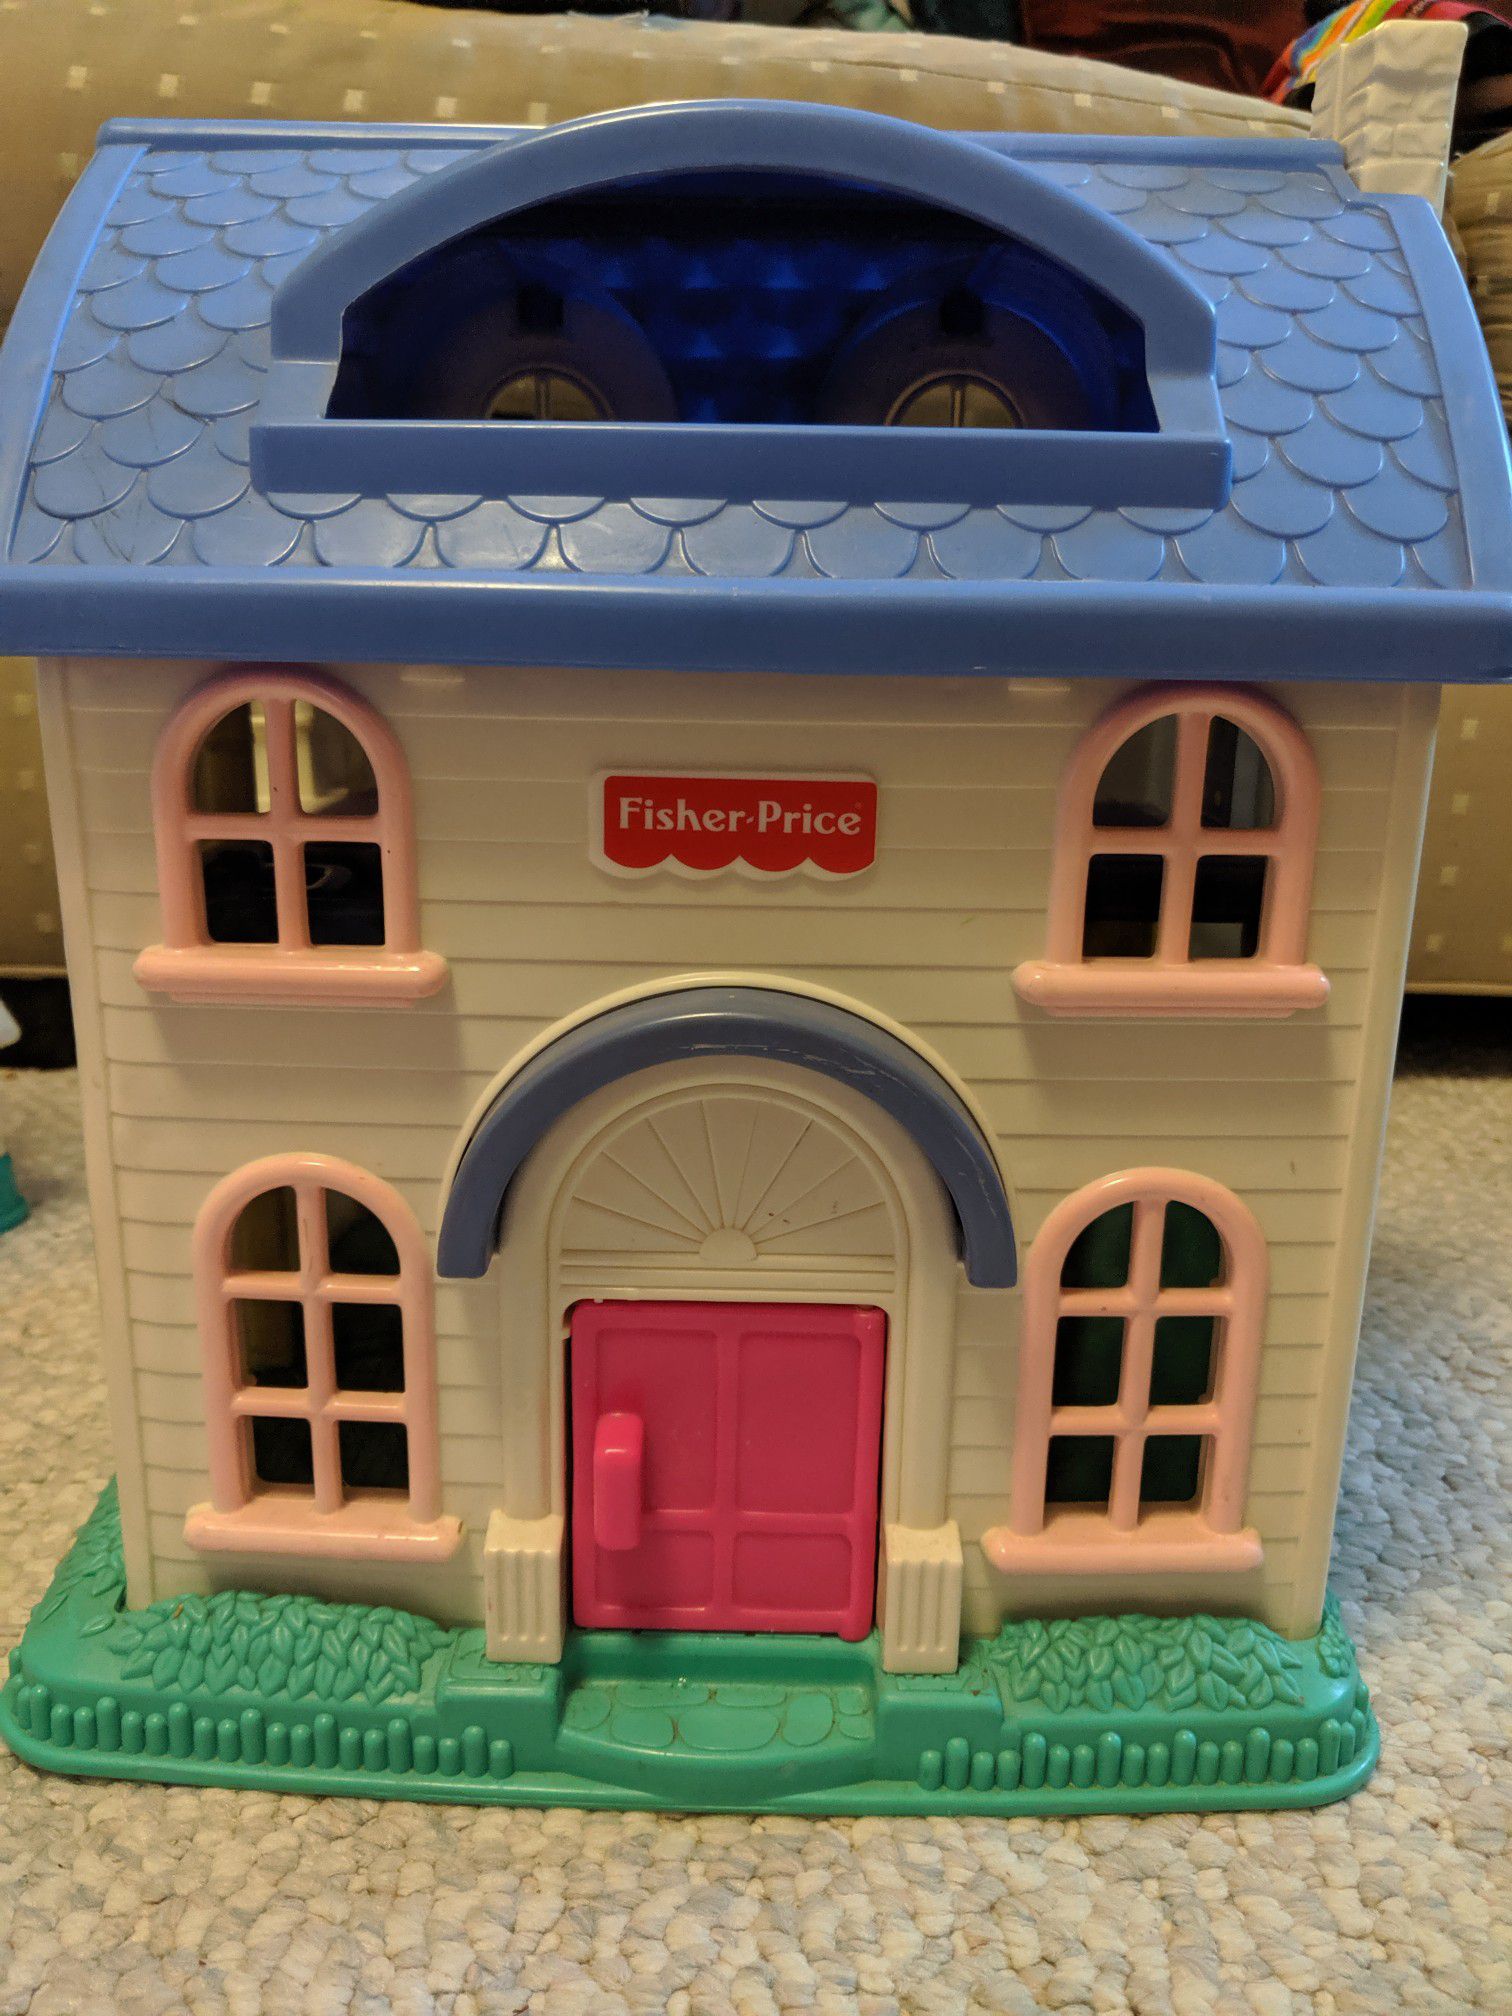 Fisher-Price doll house